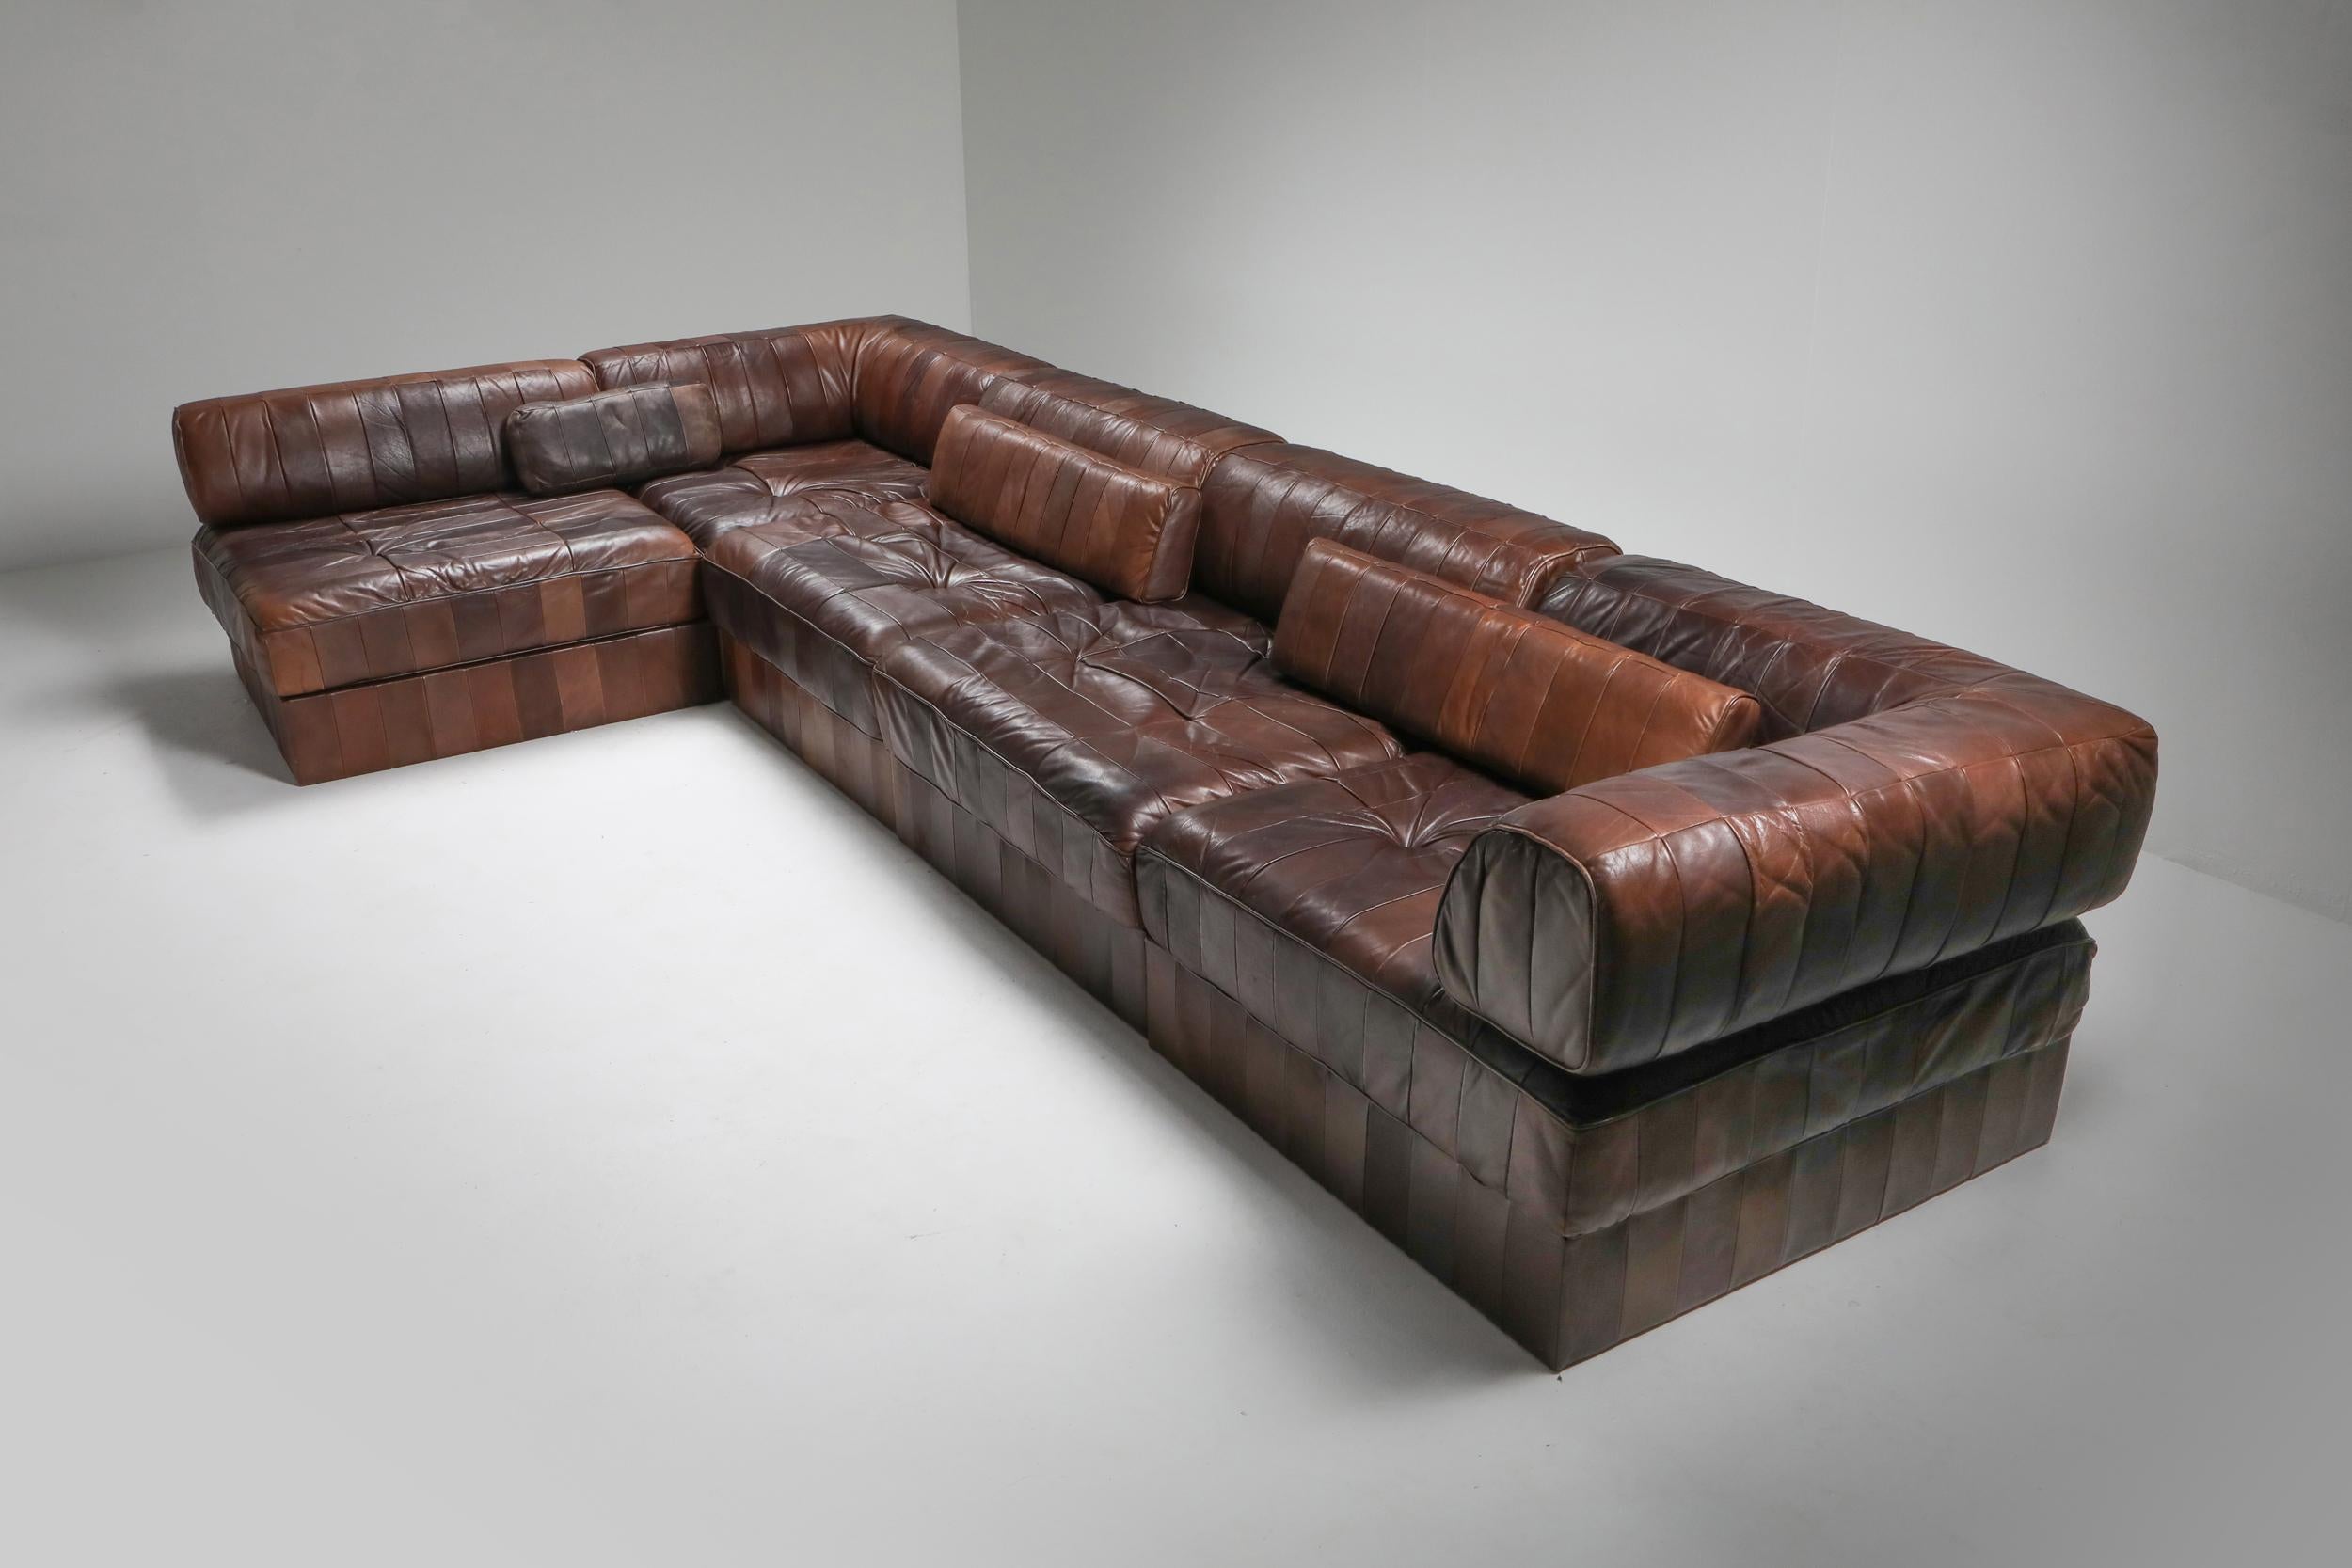 20th Century Sectional Modular Sofa in Leather Patchwork by De Sede Switzerland